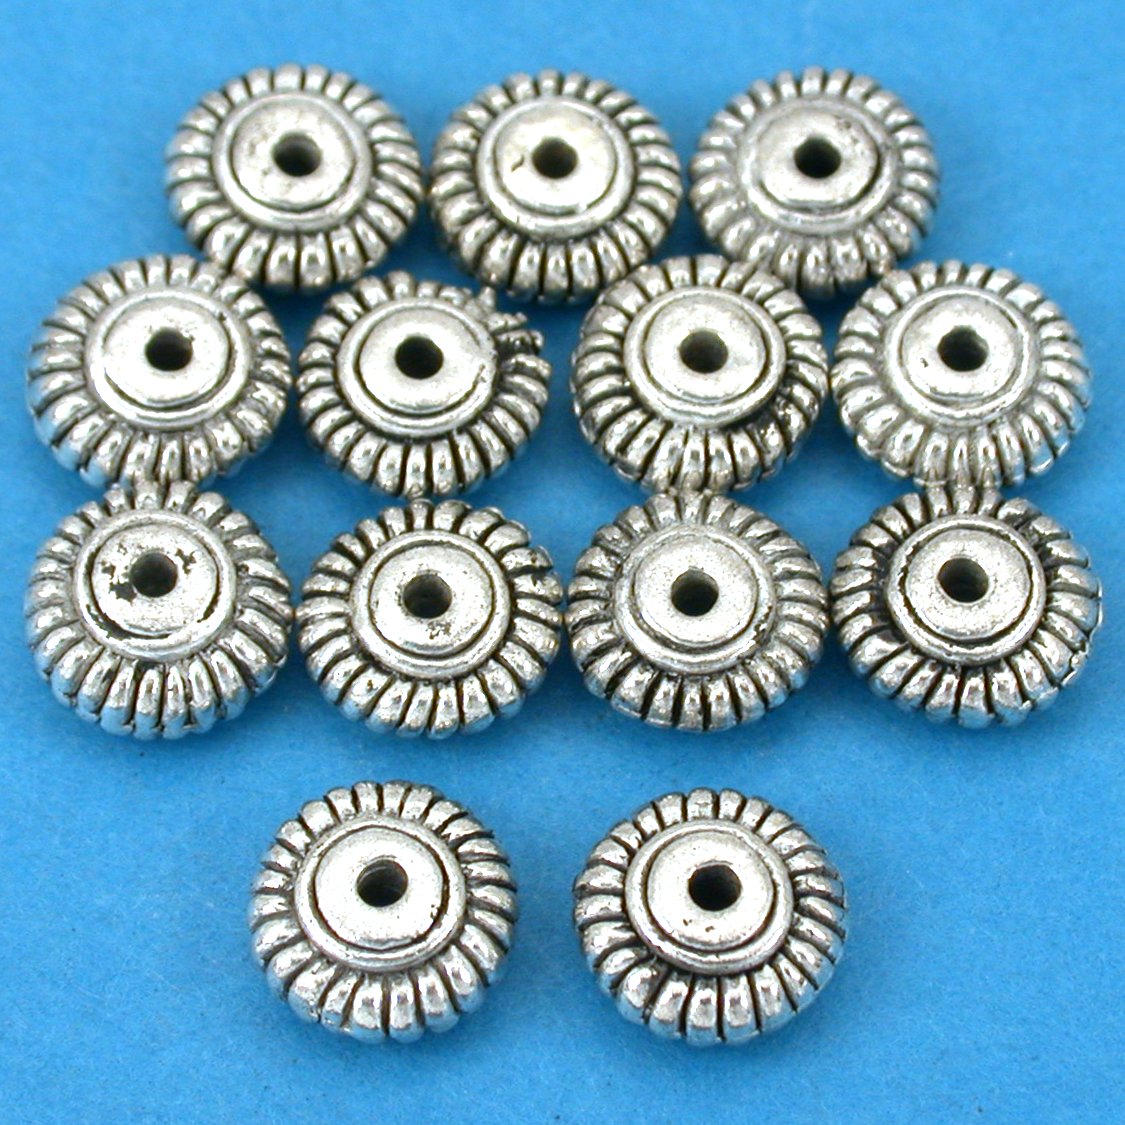 Bali Saucer Antique Silver Plated Beads 9mm 15 Grams 12Pcs Approx.